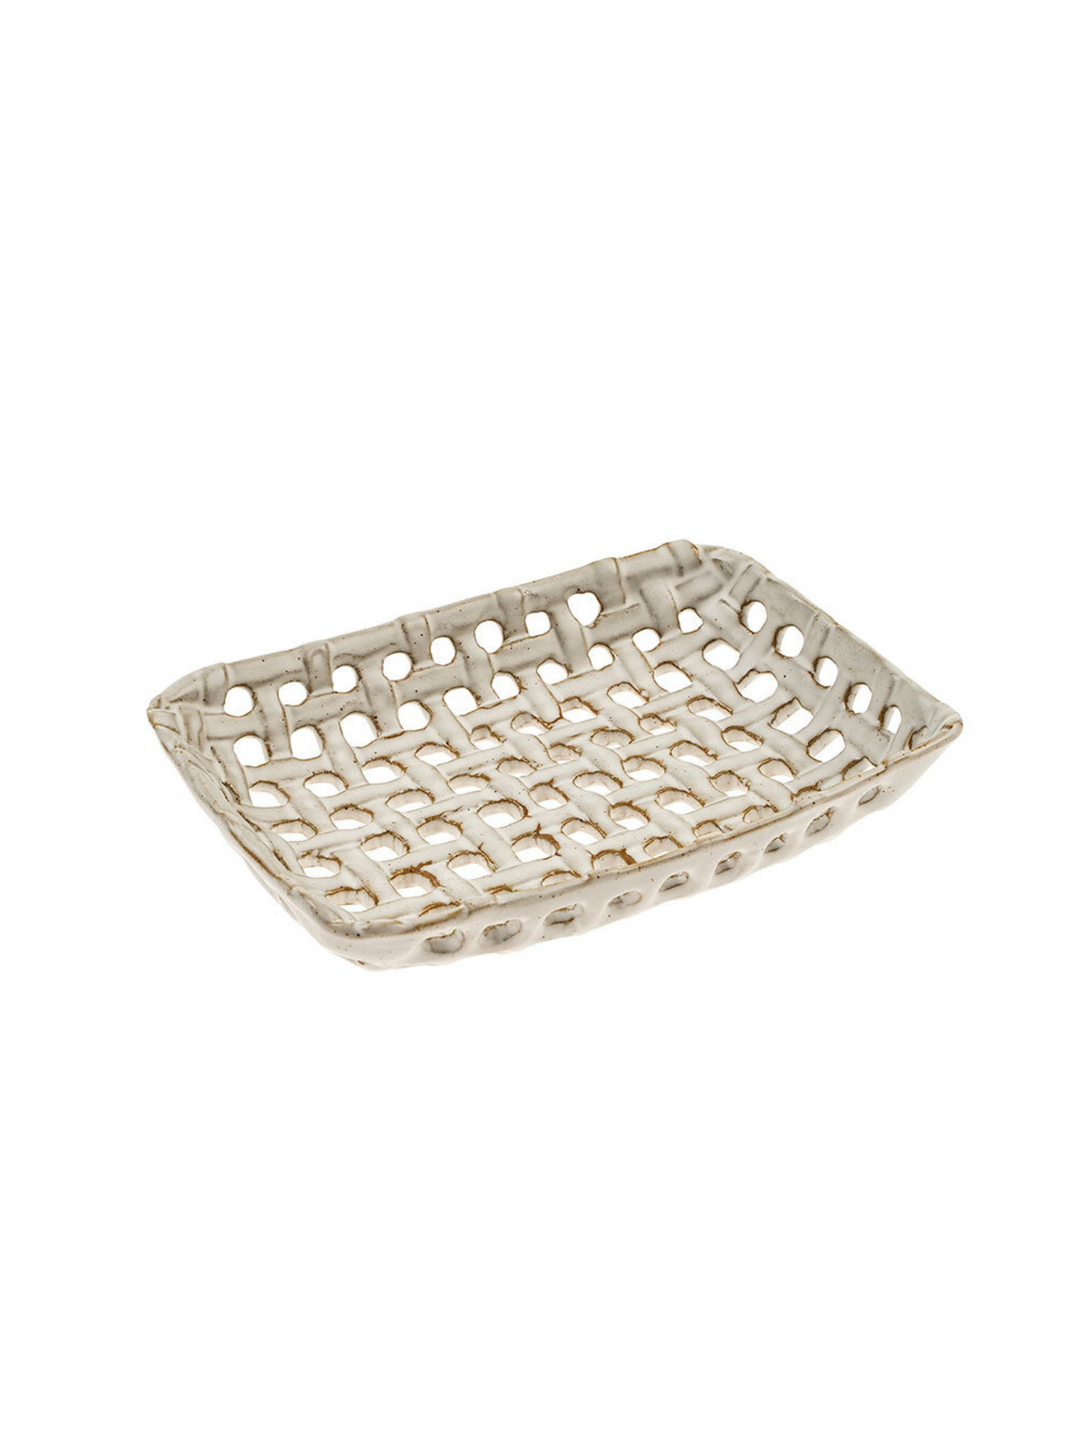 Small Porcelain Basket Tray